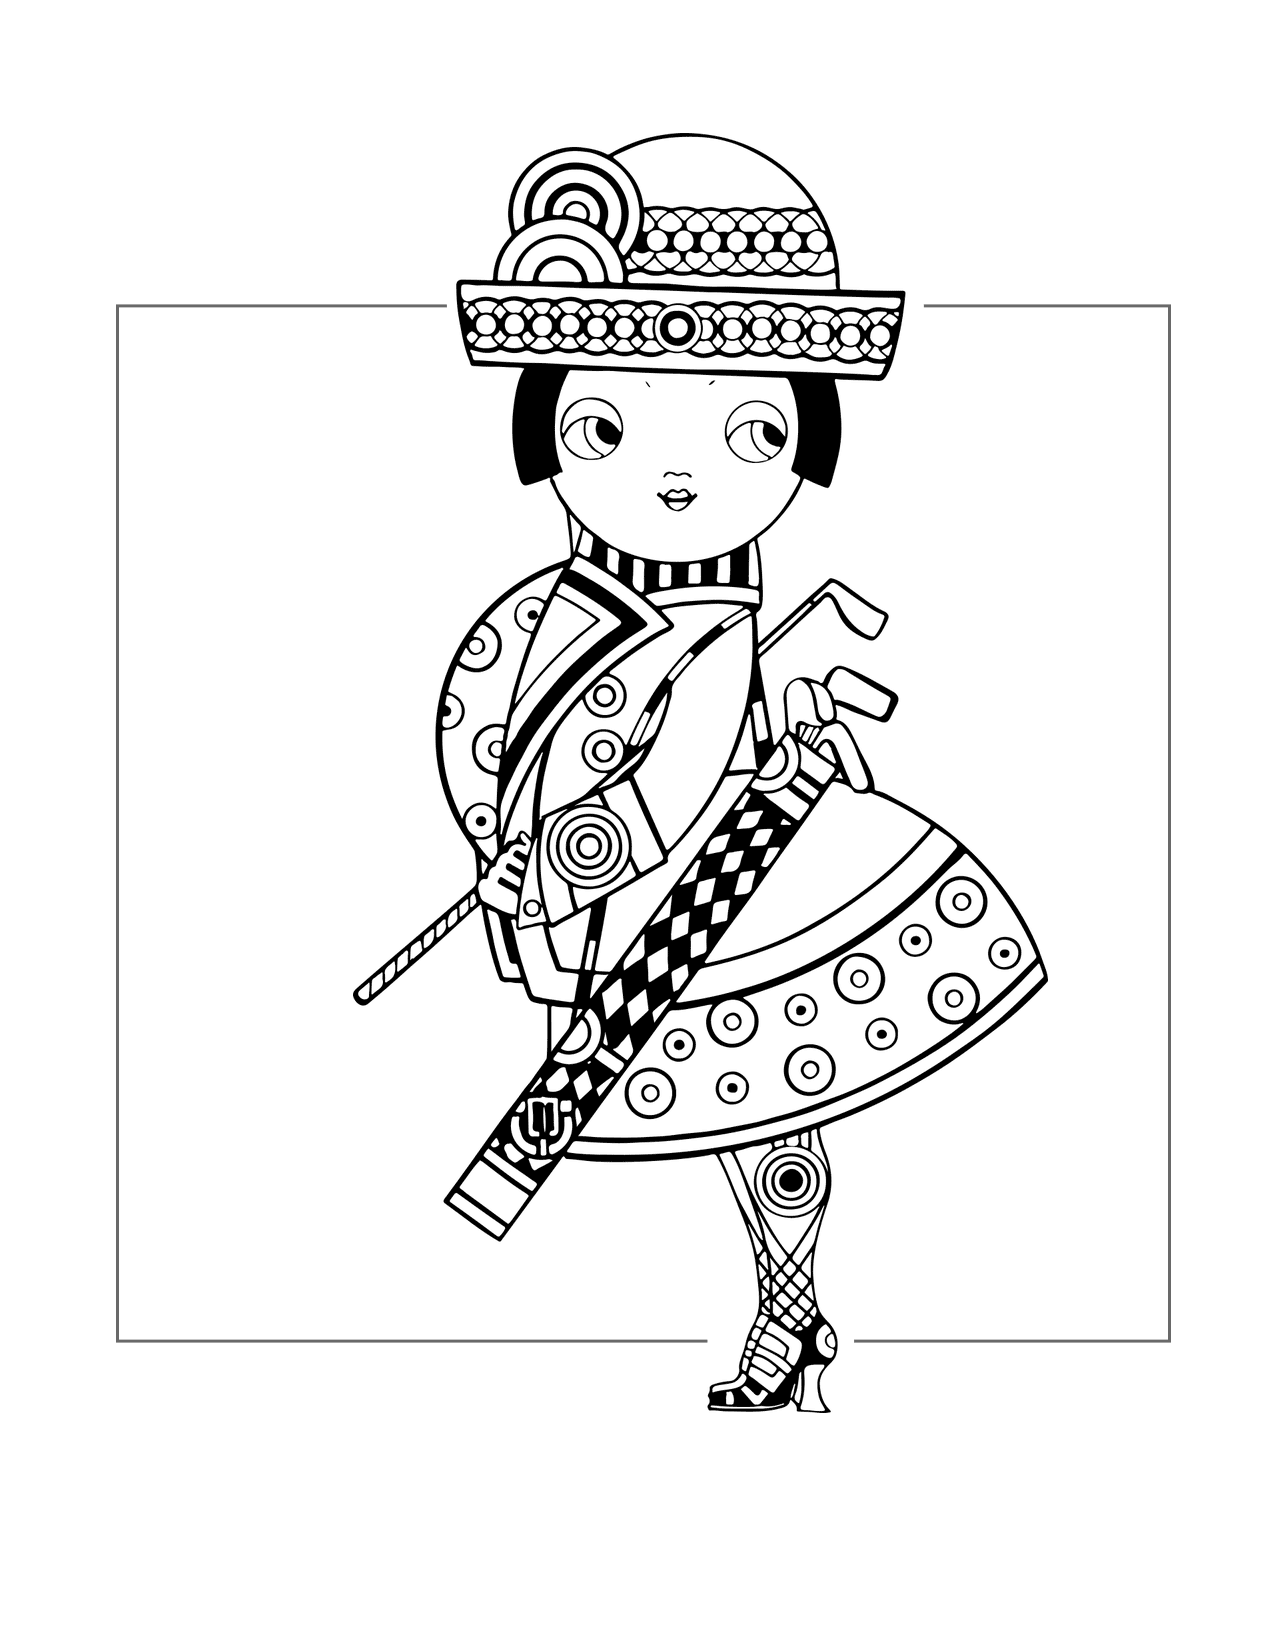 Pattern Golf Lady Cartoon Coloring Page